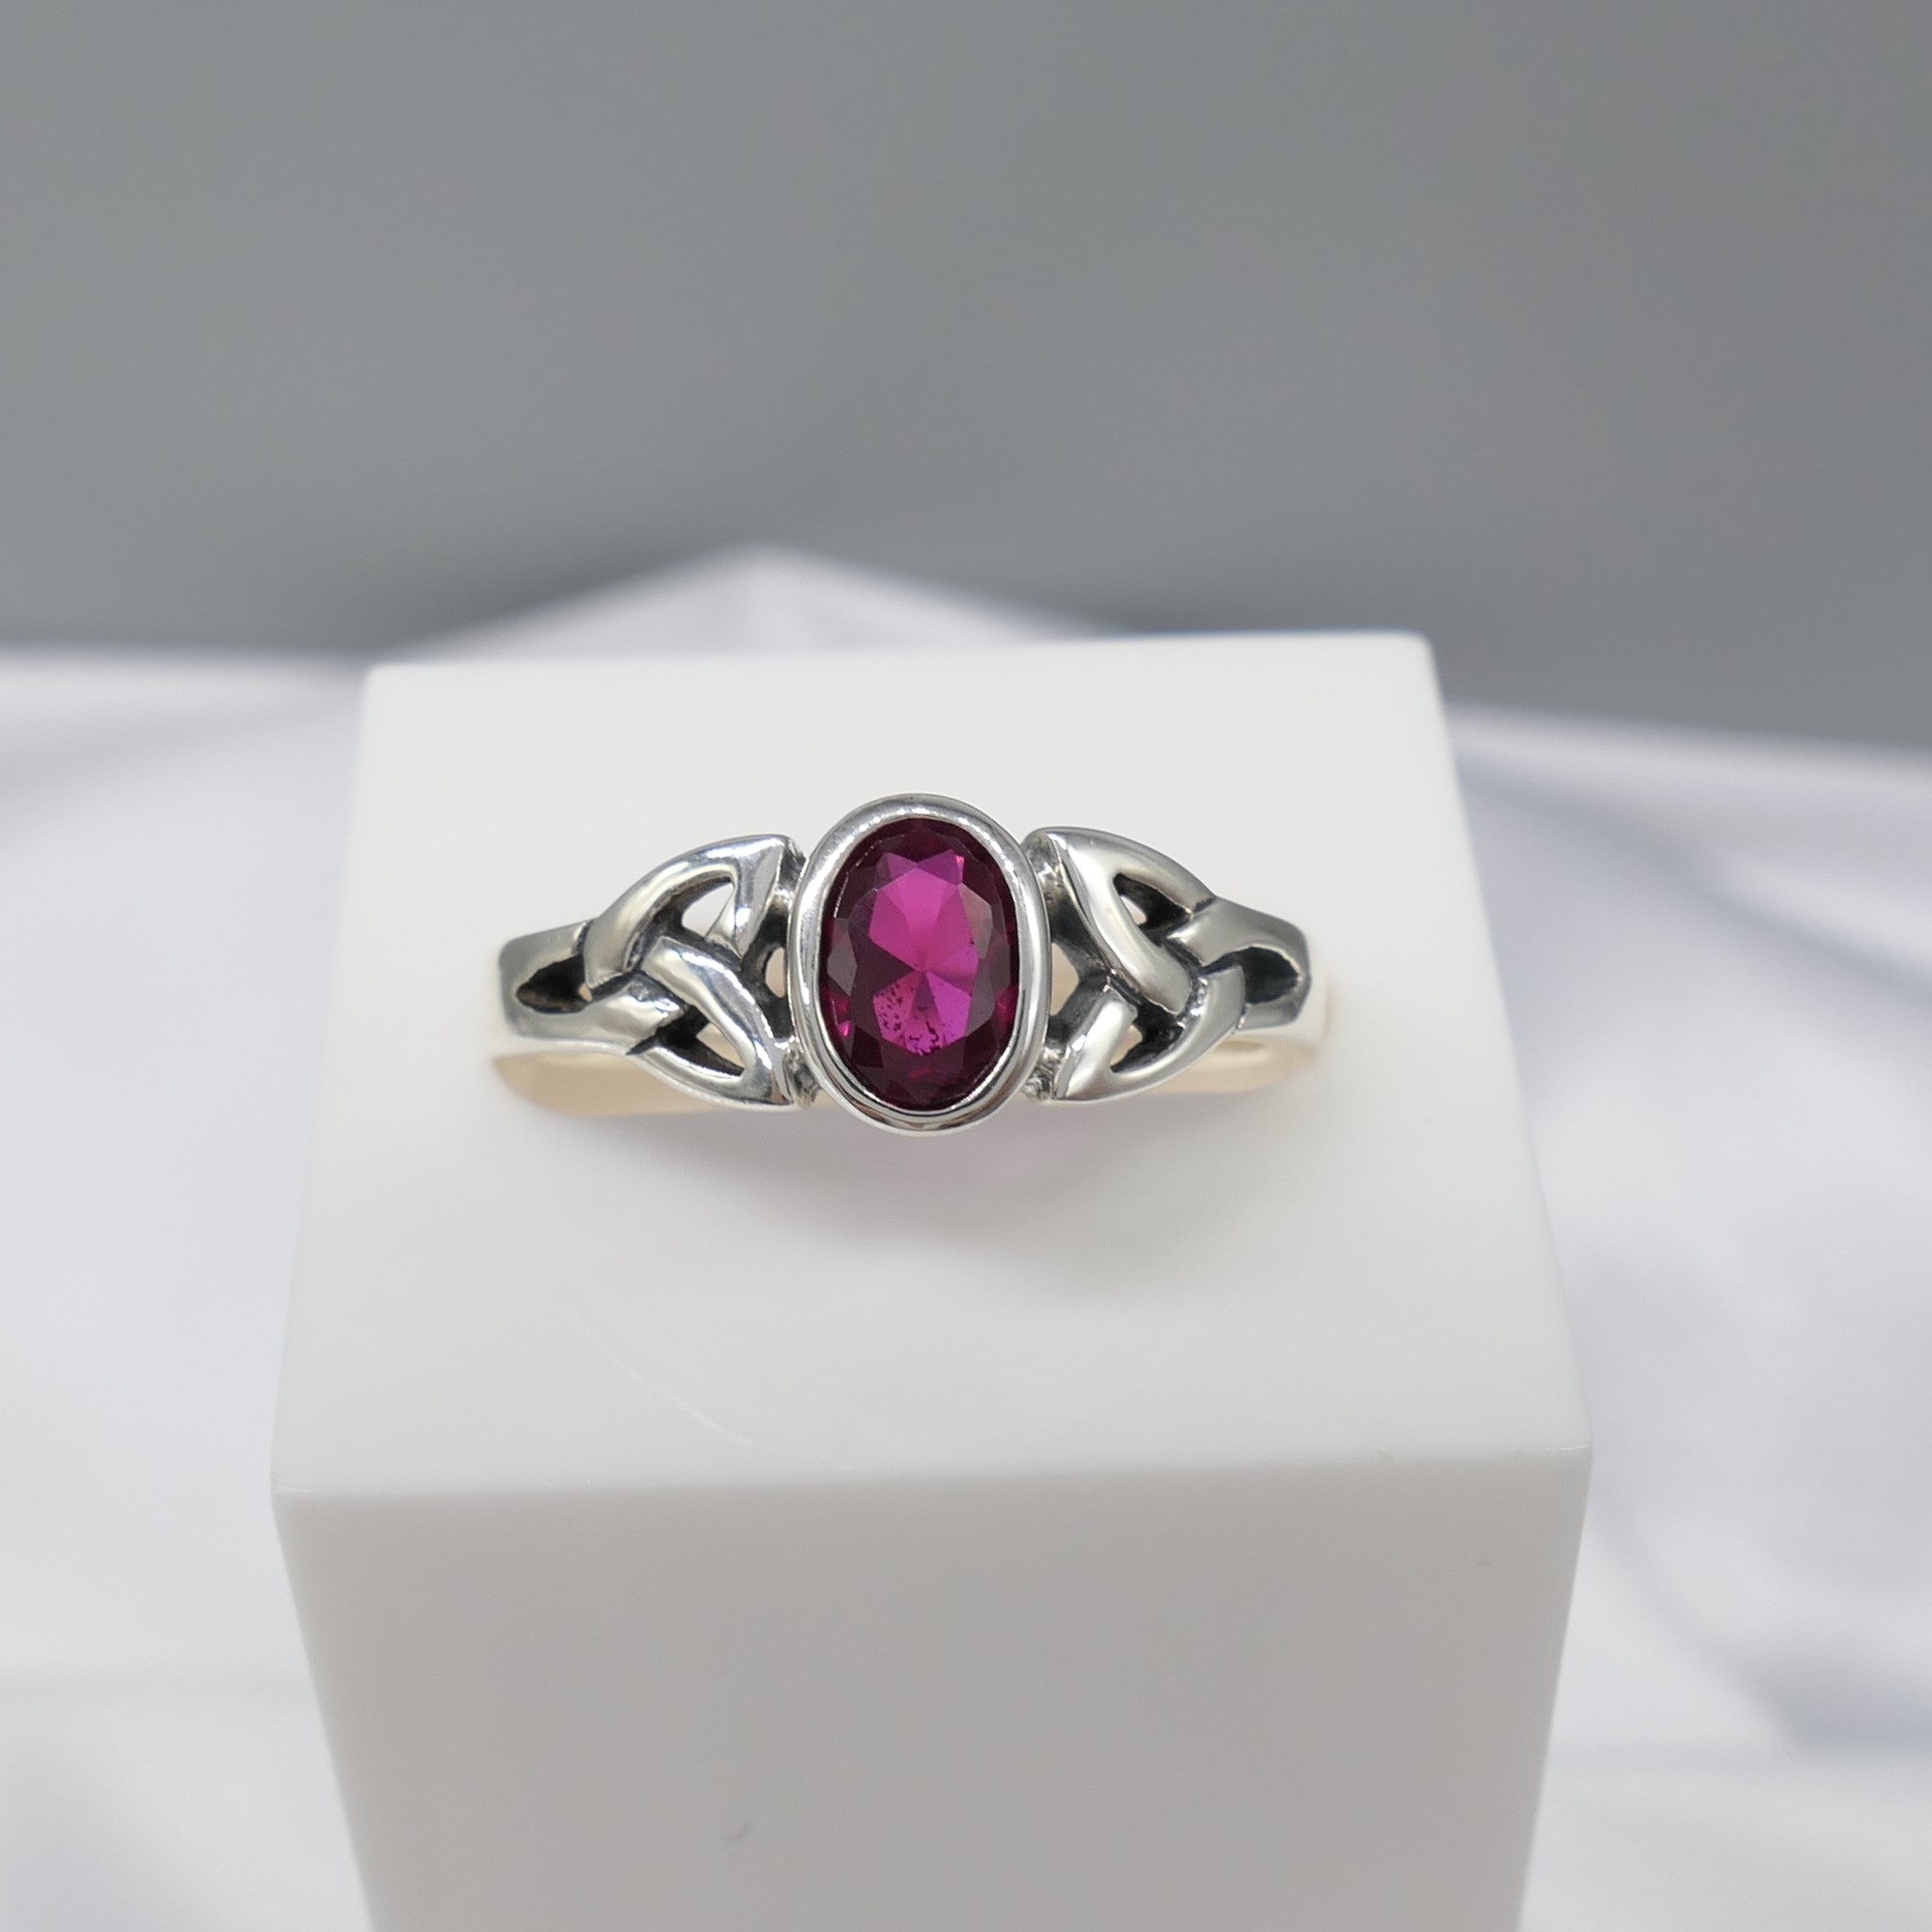 Sterling Silver Celtic-Style Dress Ring Set With An Oval Magenta Cubic Zirconia - Image 4 of 5